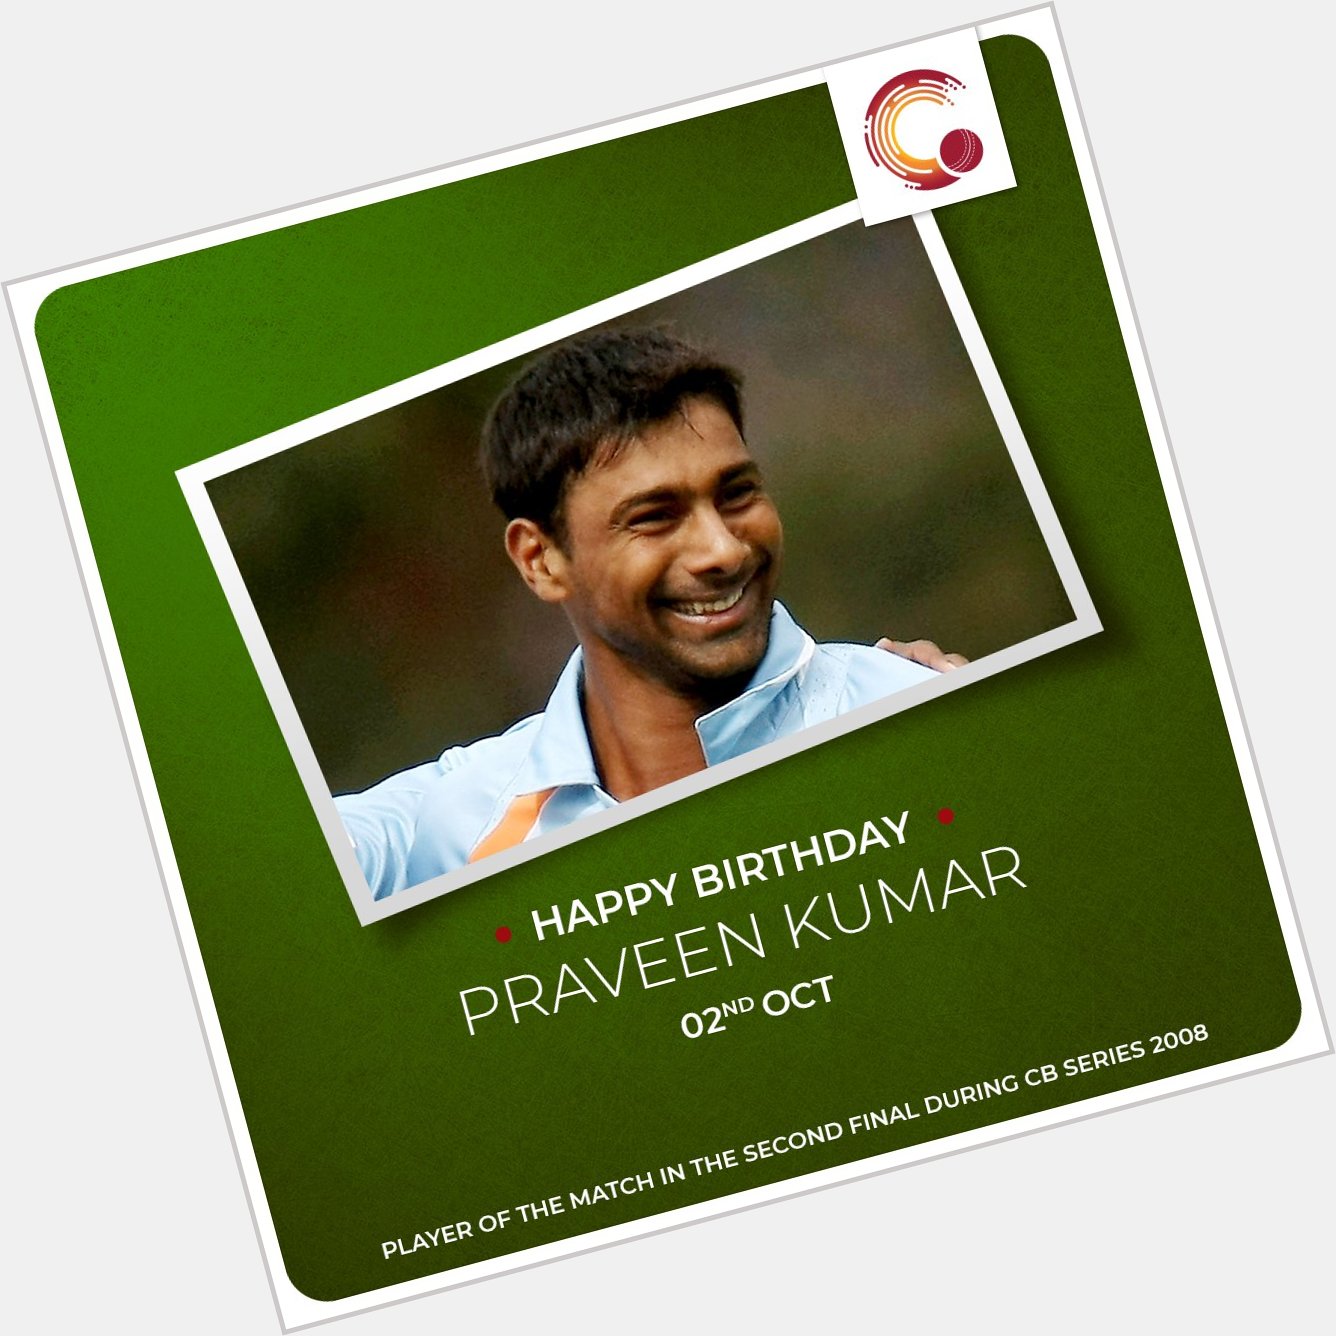 A bowler who was able to swing the ball both ways efficiently was born Happy Birthday, Praveen Kumar! 